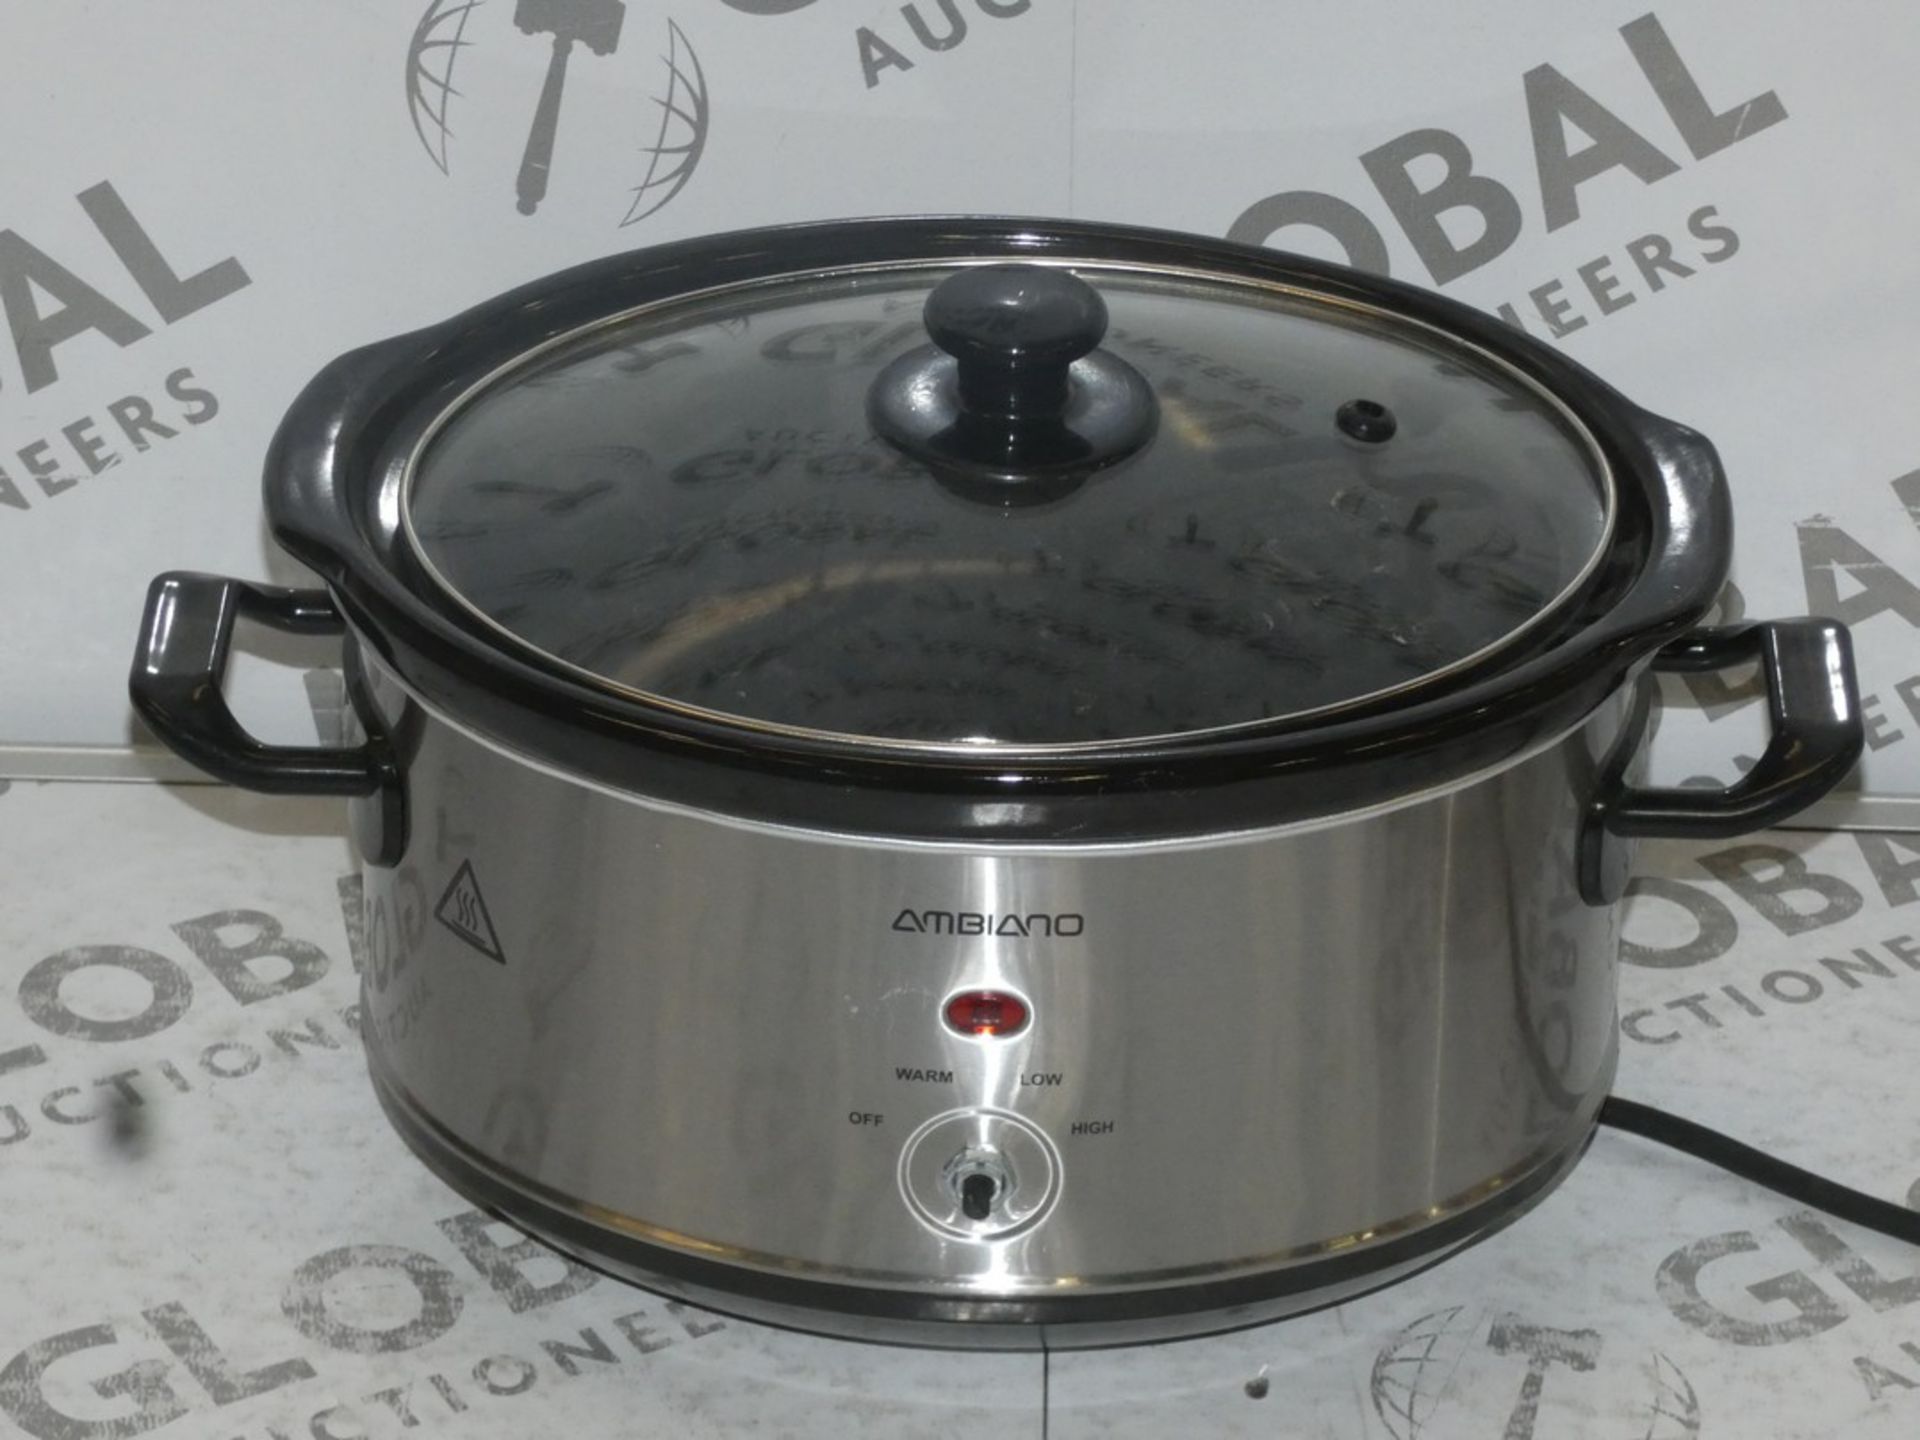 Lot to Contain 5 Assorted Ambiano Home Starter Slow Cookers